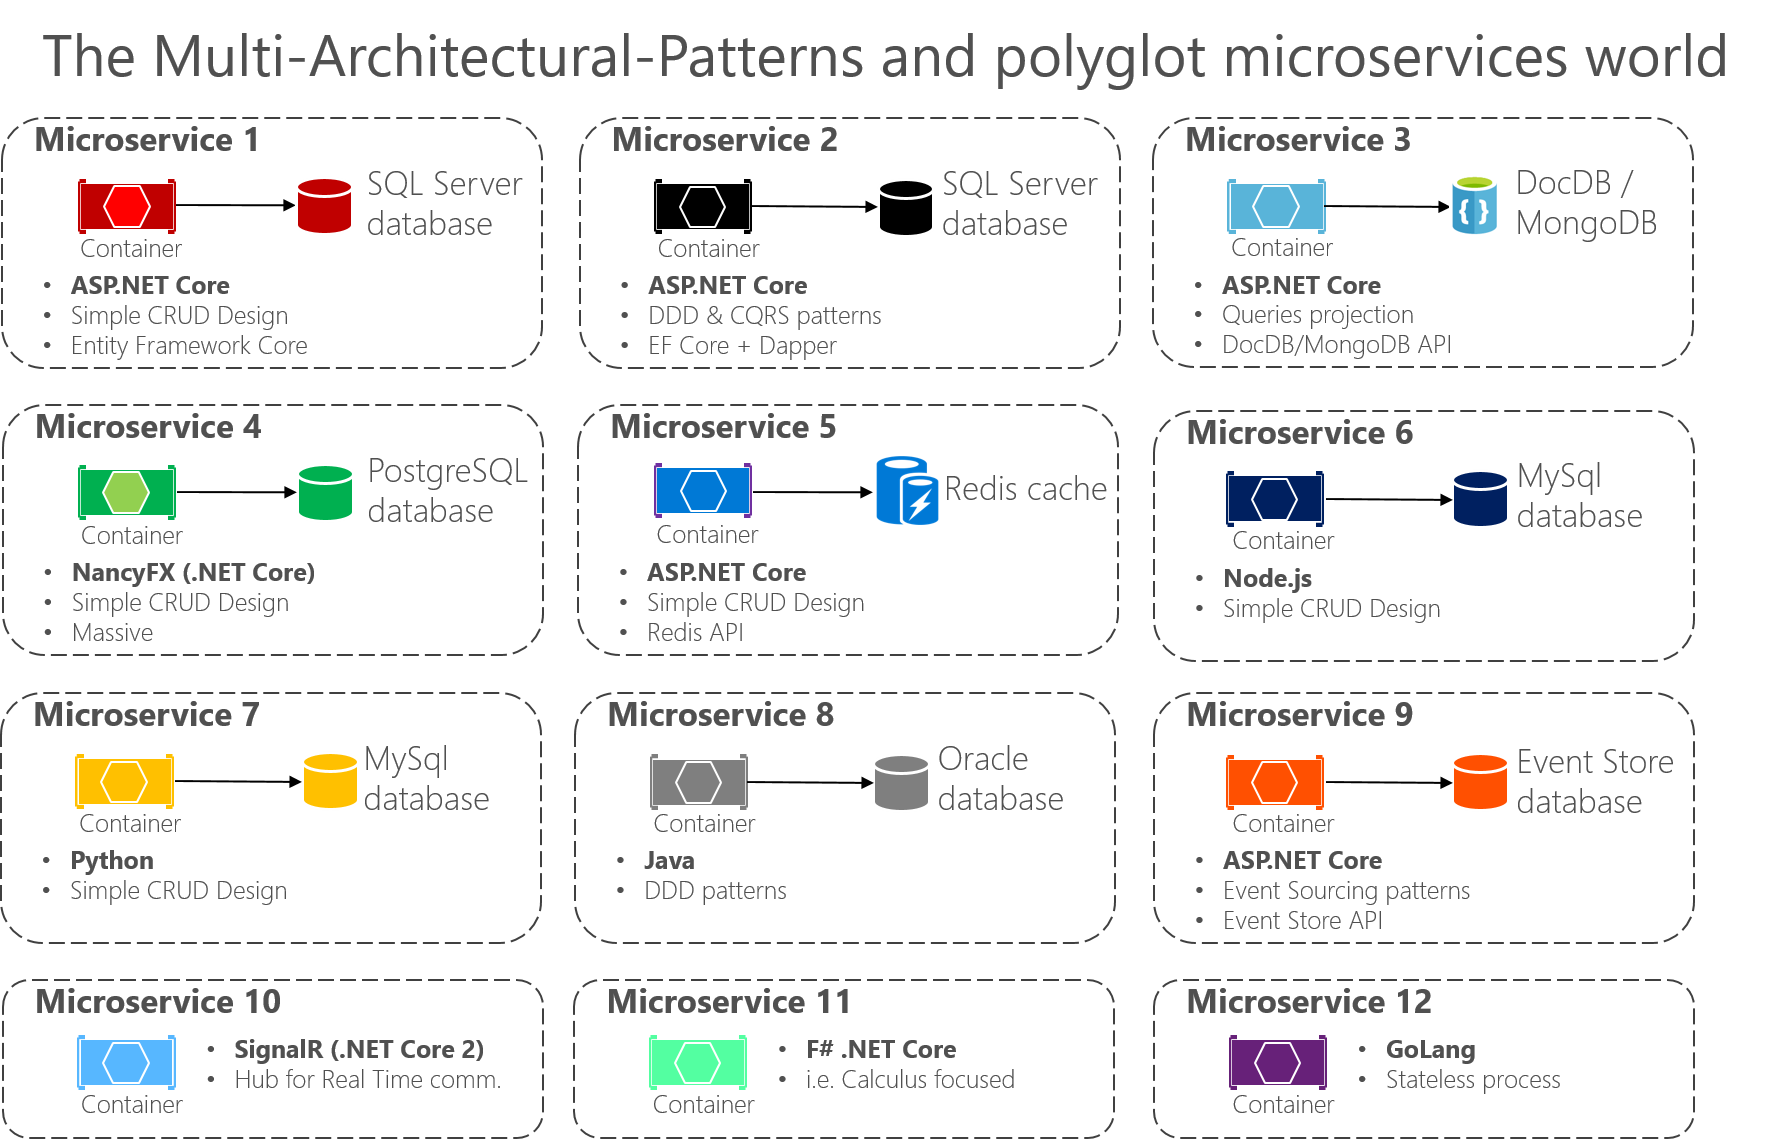 Diagram showing 12 complex microservices in a polyglot world architecture.